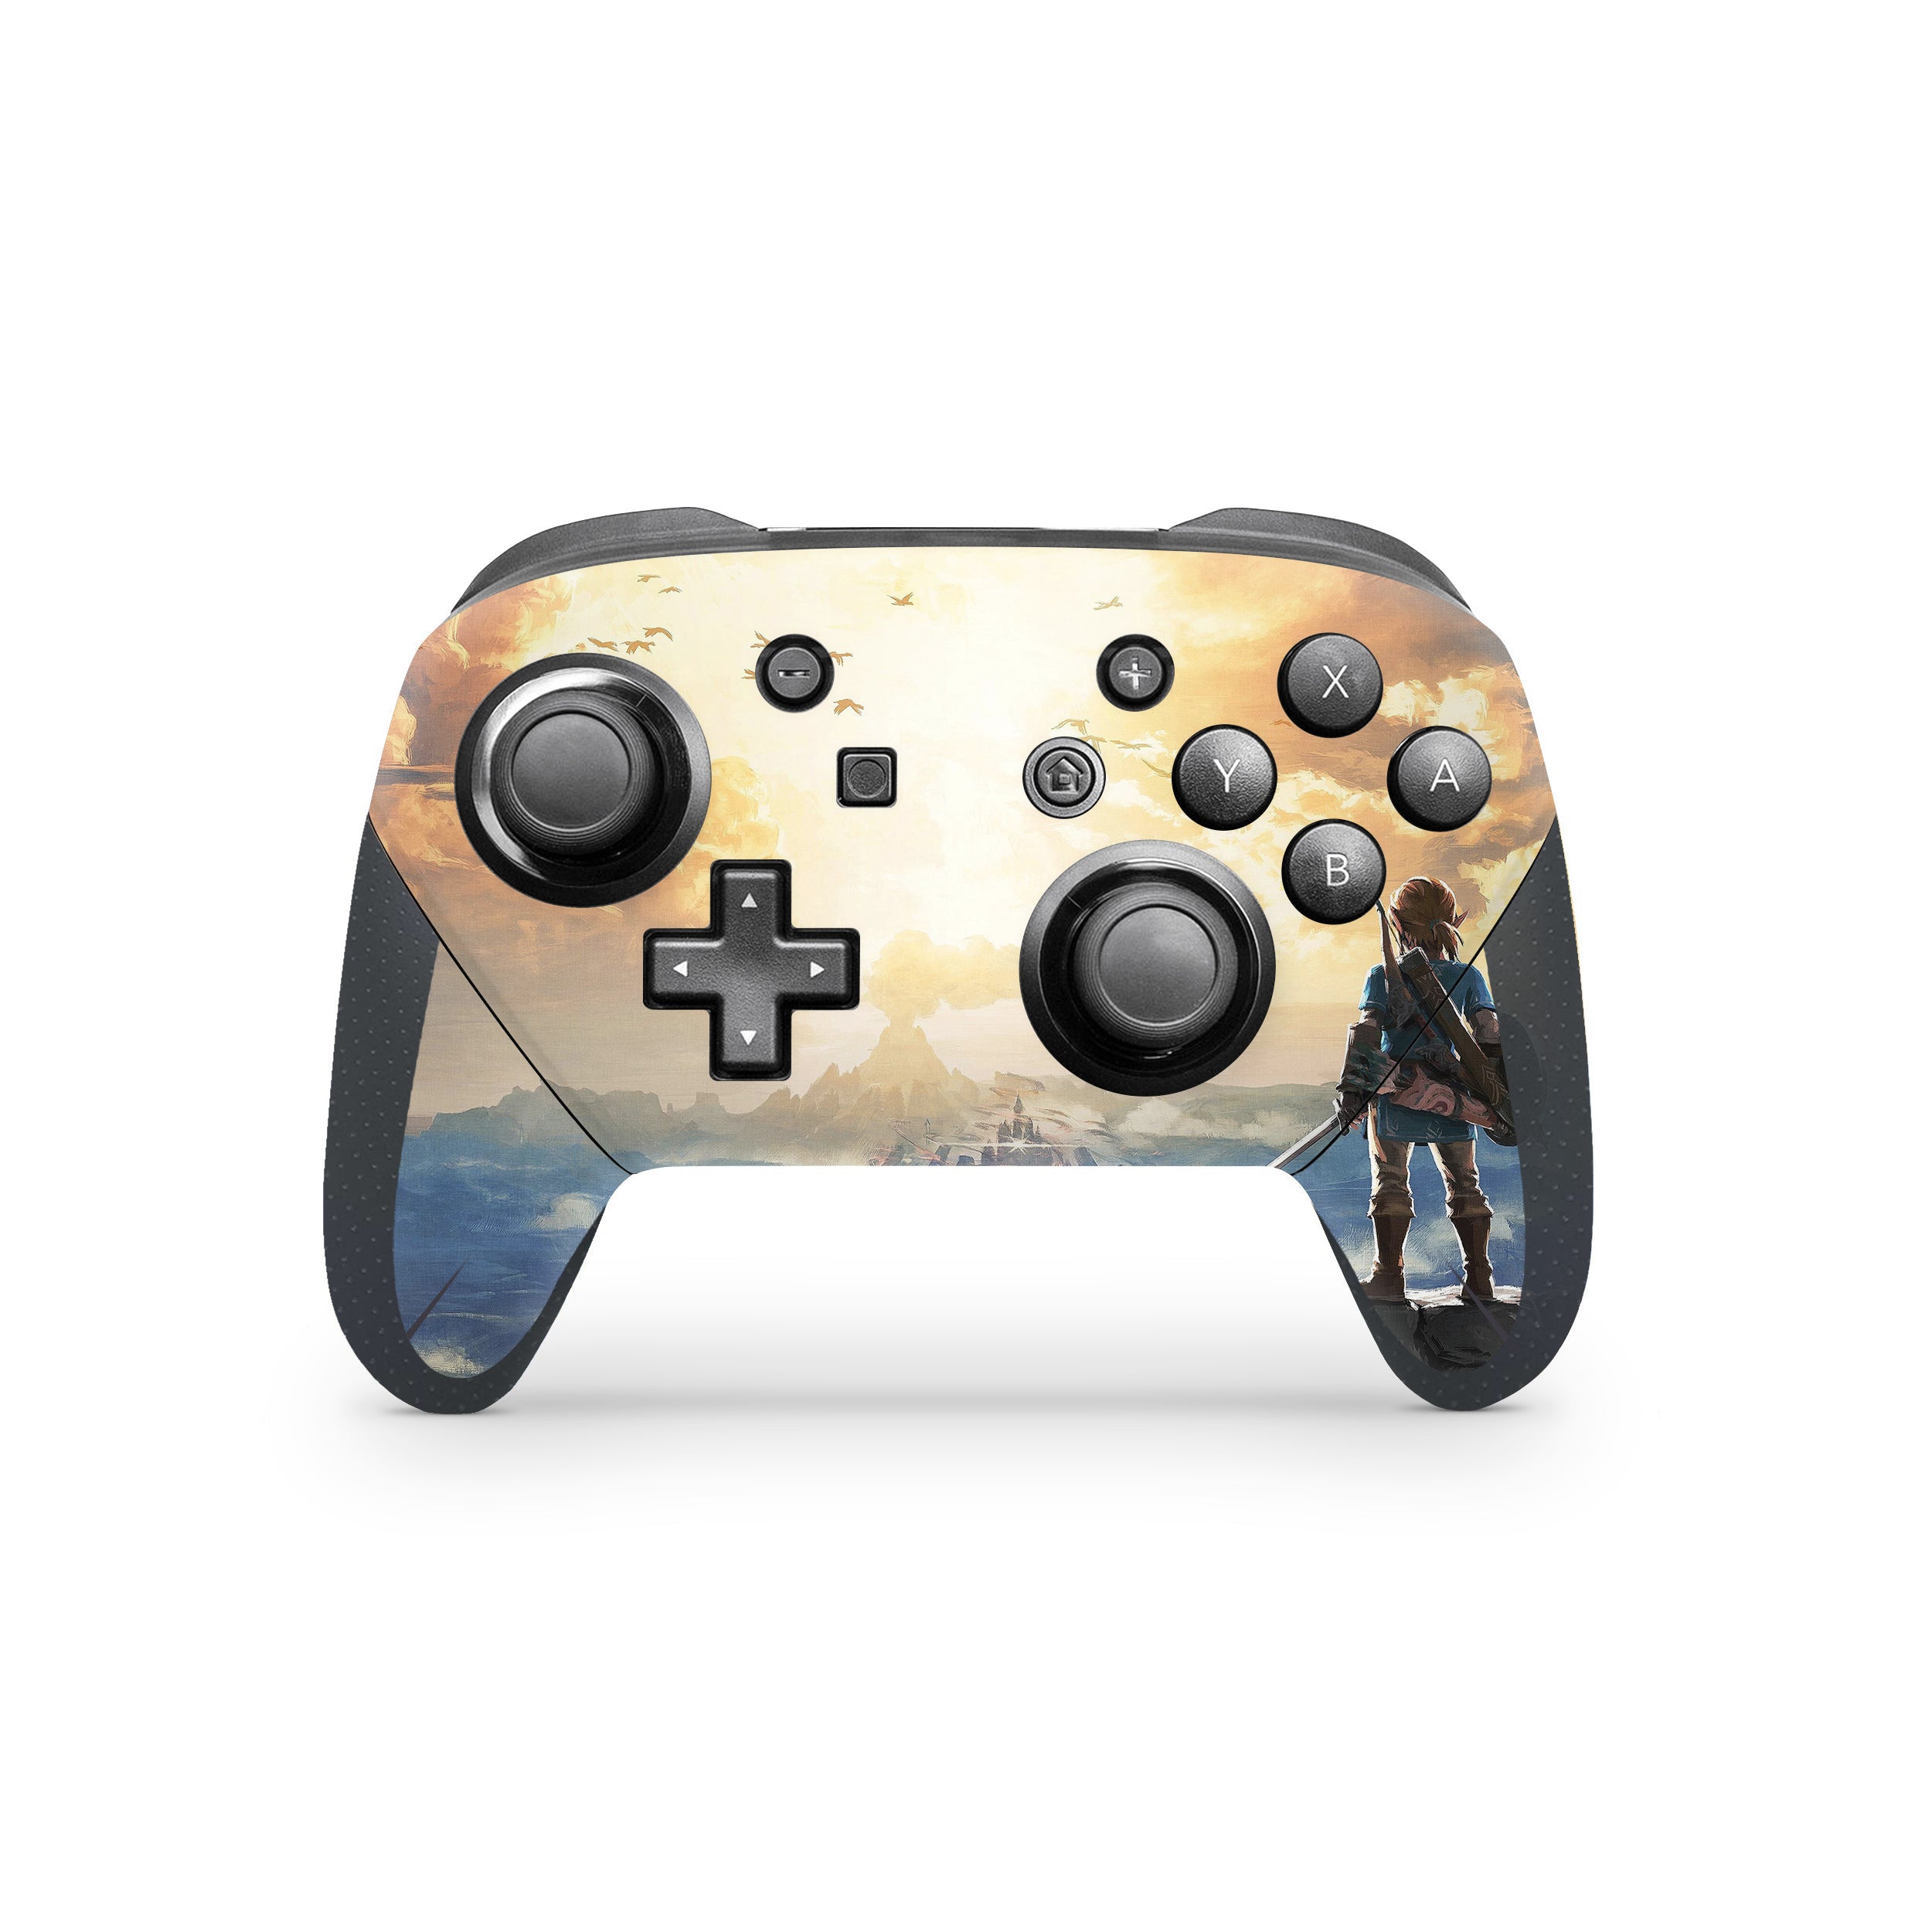 A video game skin featuring a Zelda design for the Switch Pro Controller.